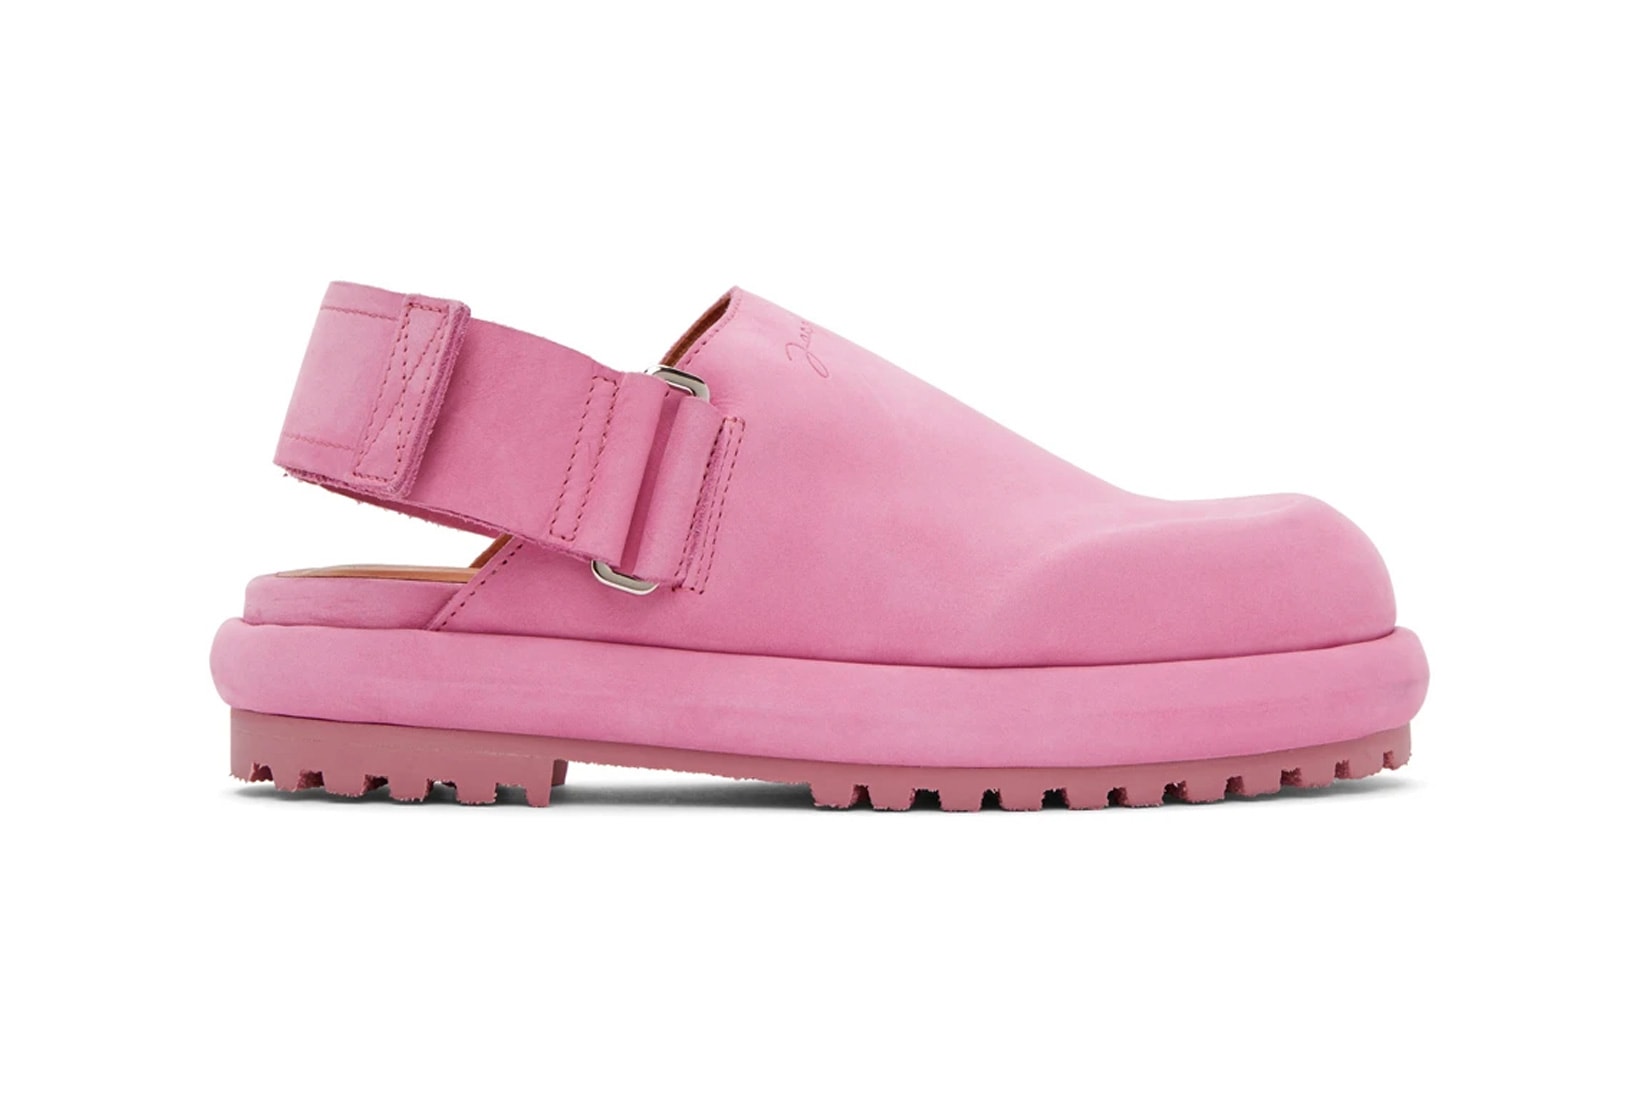 Jacquemus Releases Les Mules in Pink and Taupe